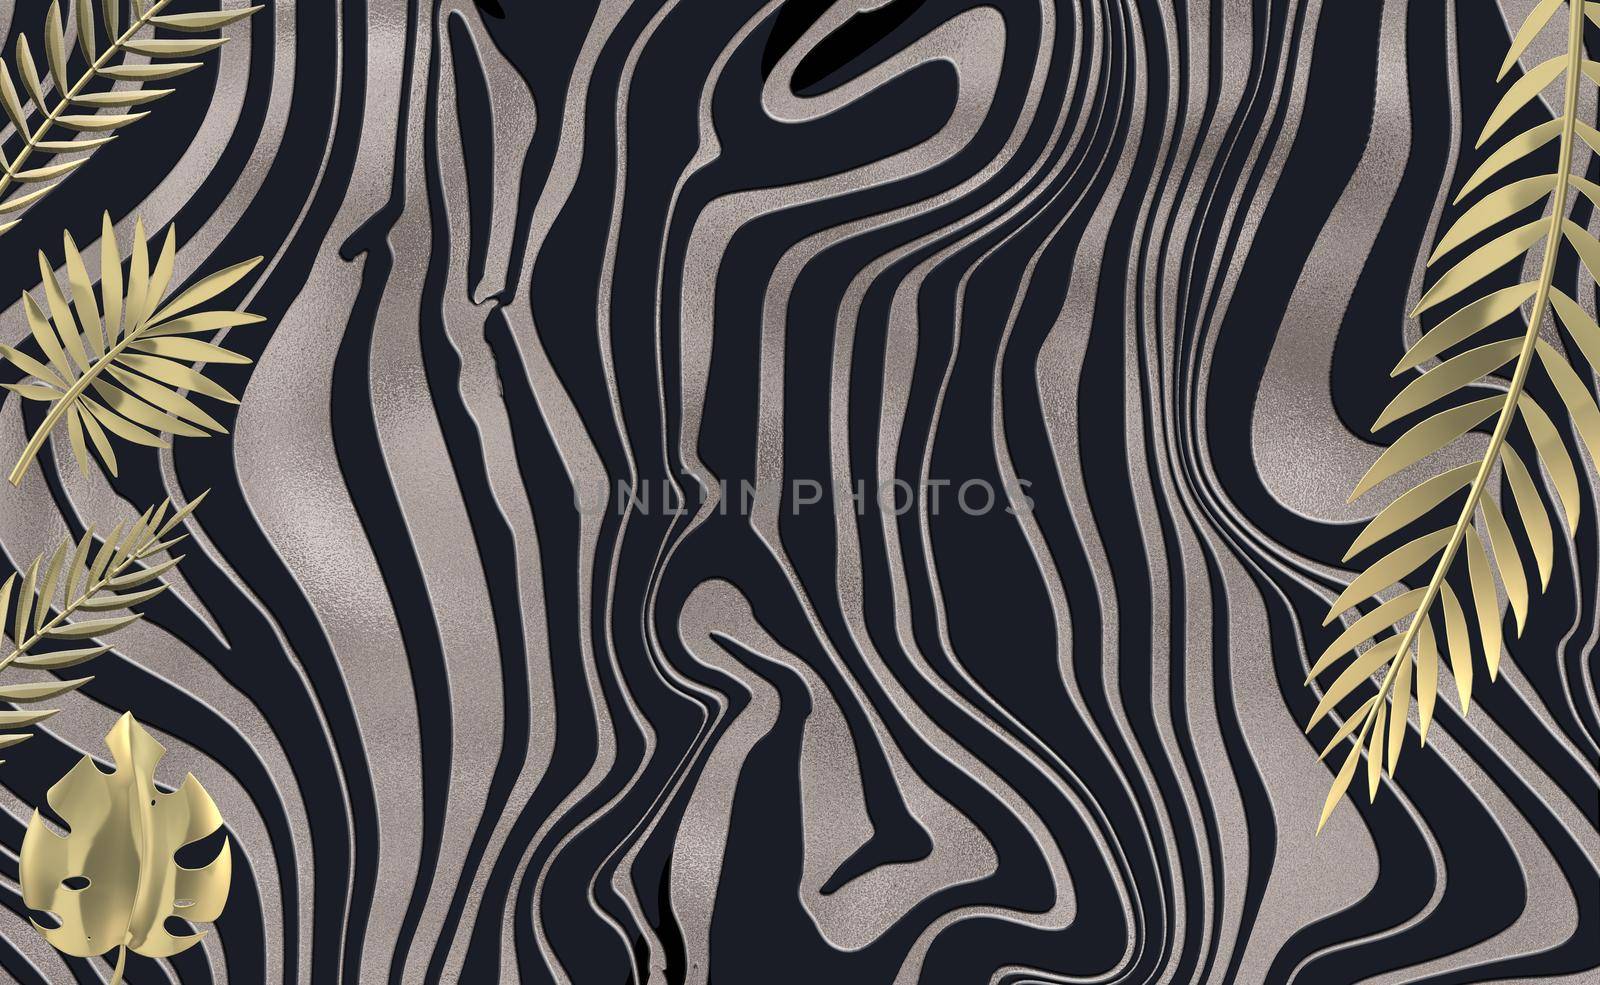 Zebra abstract background, wavy black gold beautiful pattern. Safari, wildlife zoo natural background with golden tropical leaves. African animal design. Horizontal background. Illustration